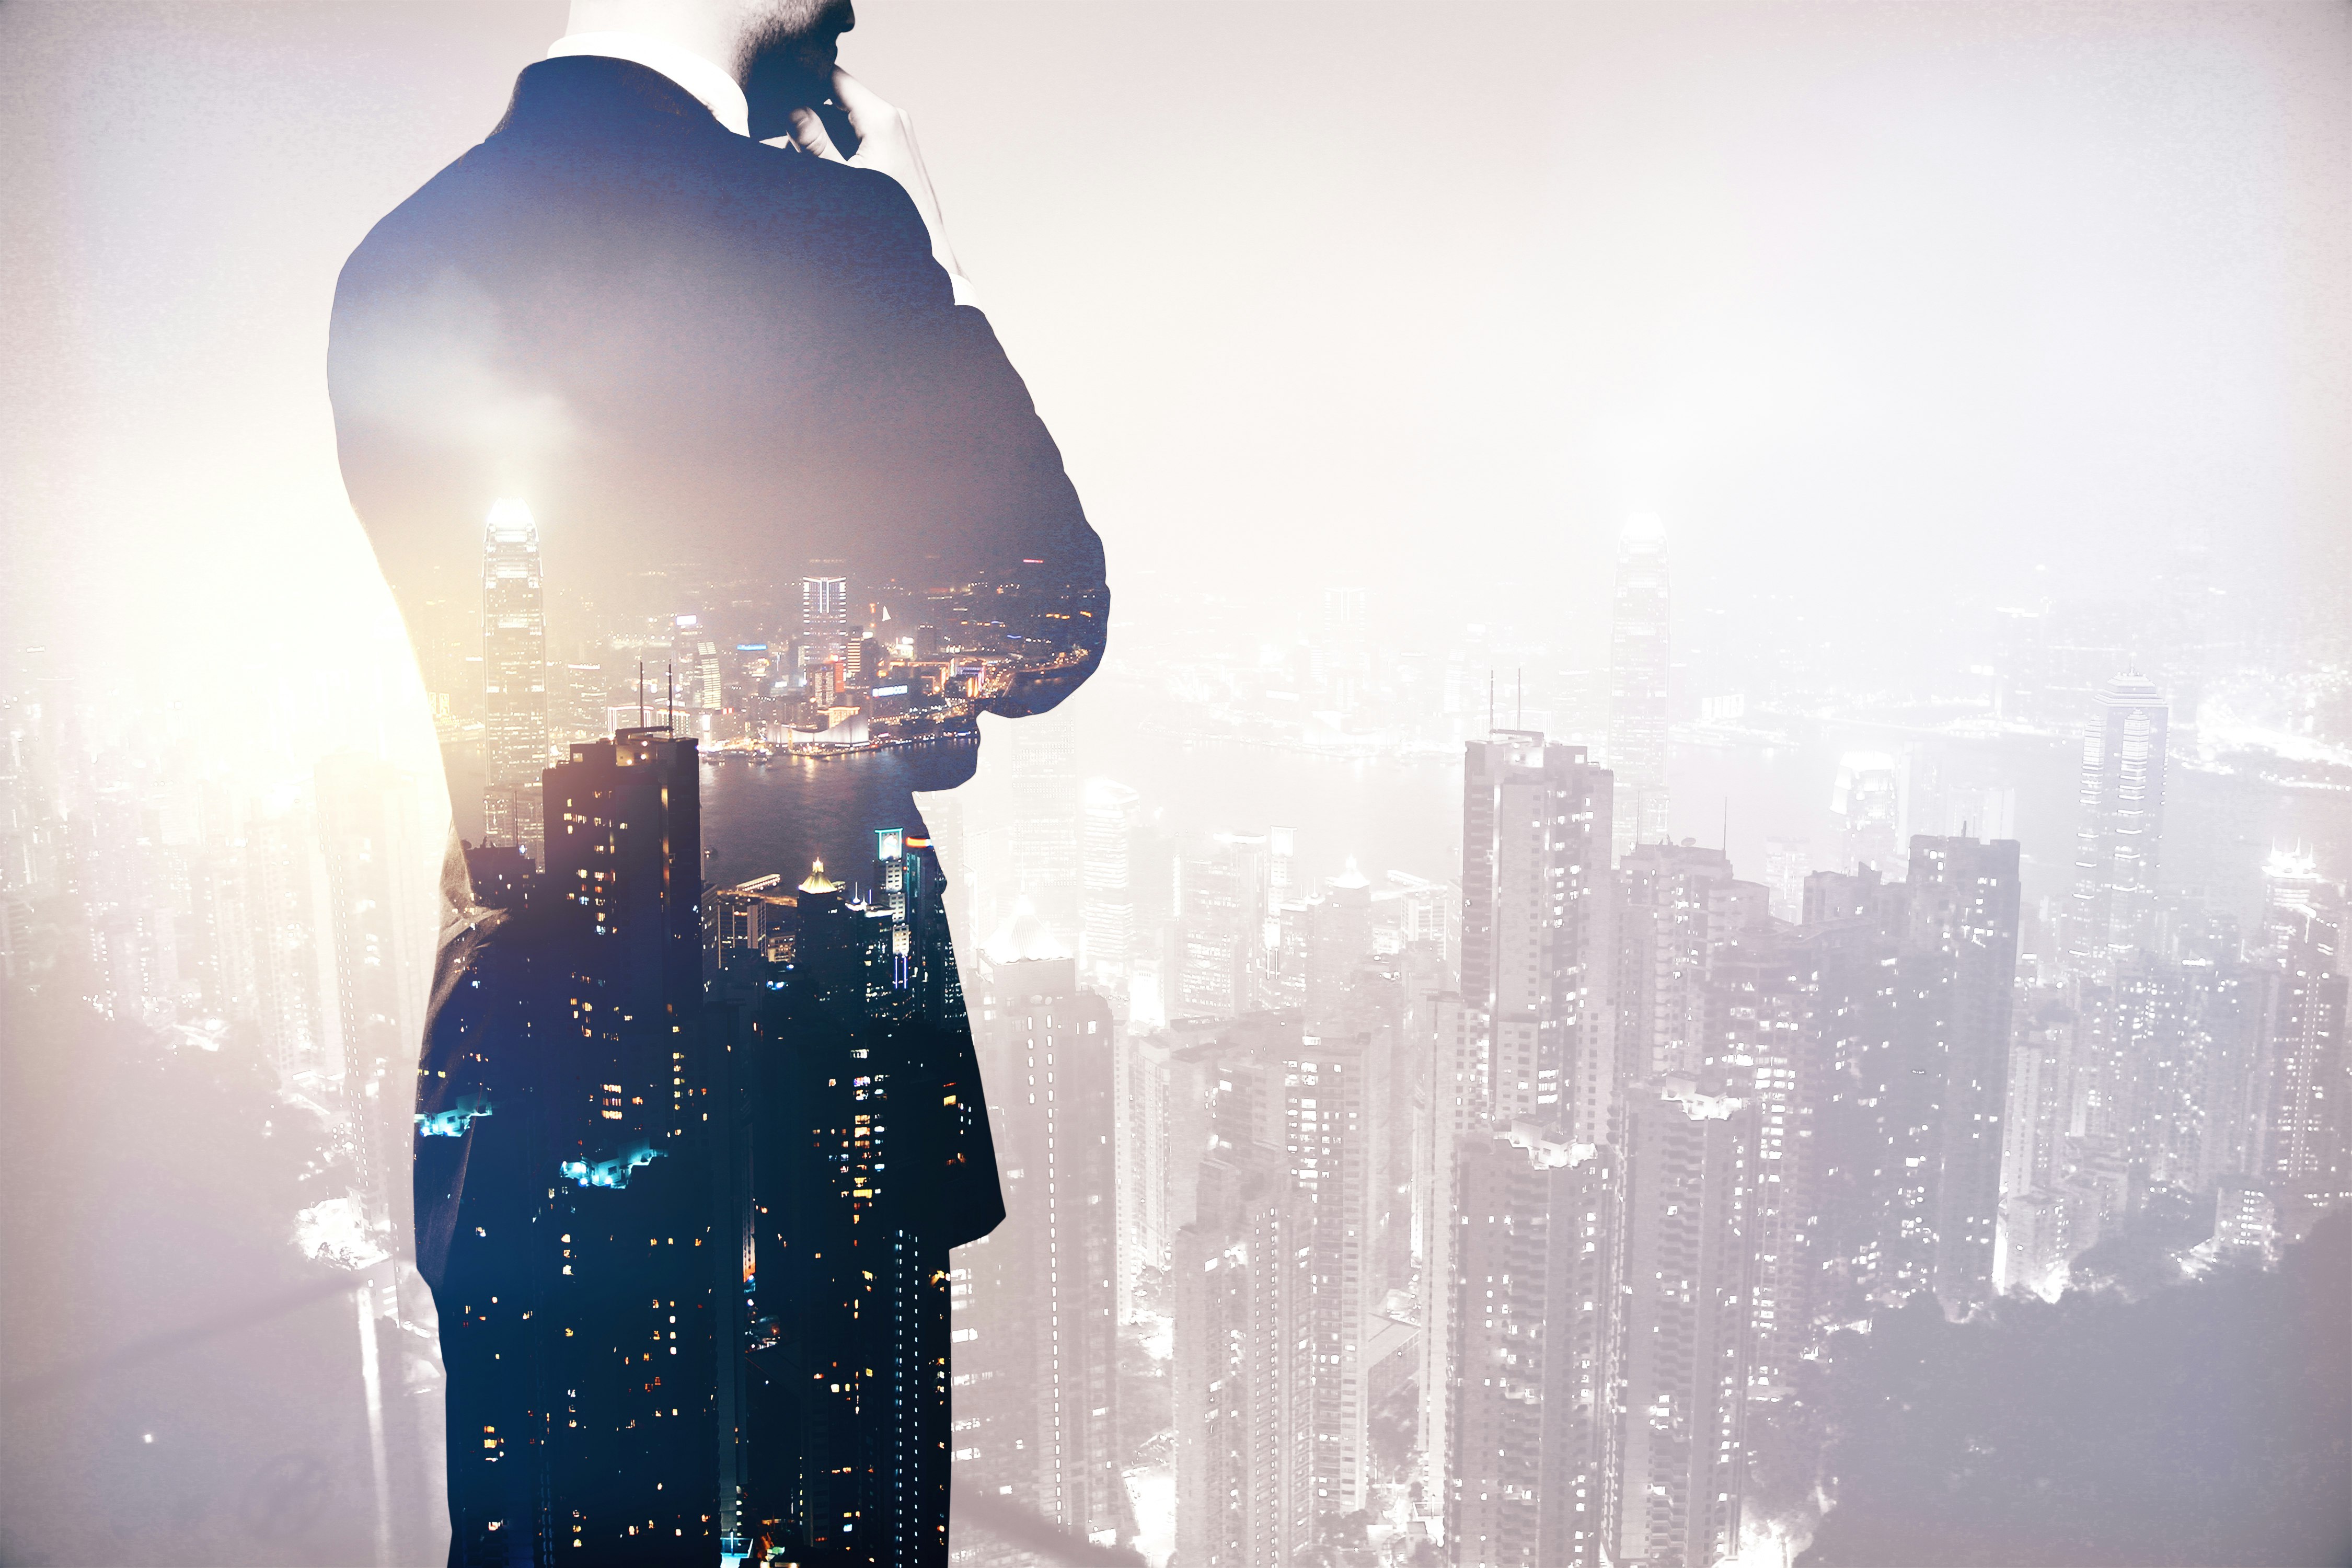 Back view of thinking business man in suit on night city background. Research concept. Double exposure